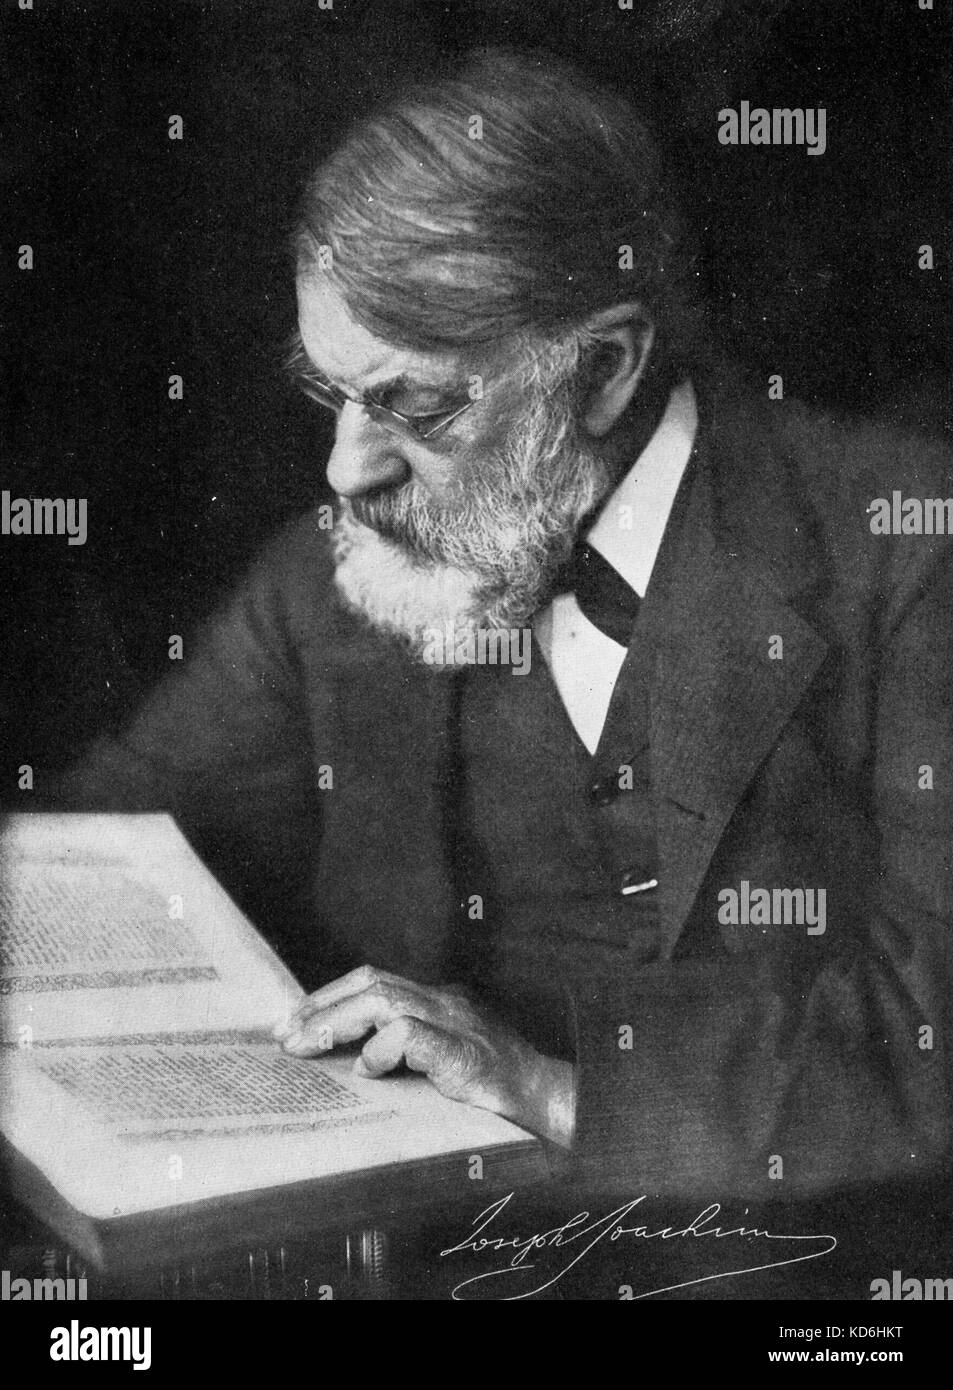 Joseph Joachim reading a book. Hungarian (Germanised) violinist, composer and conductor, 1831-1907. Stock Photo